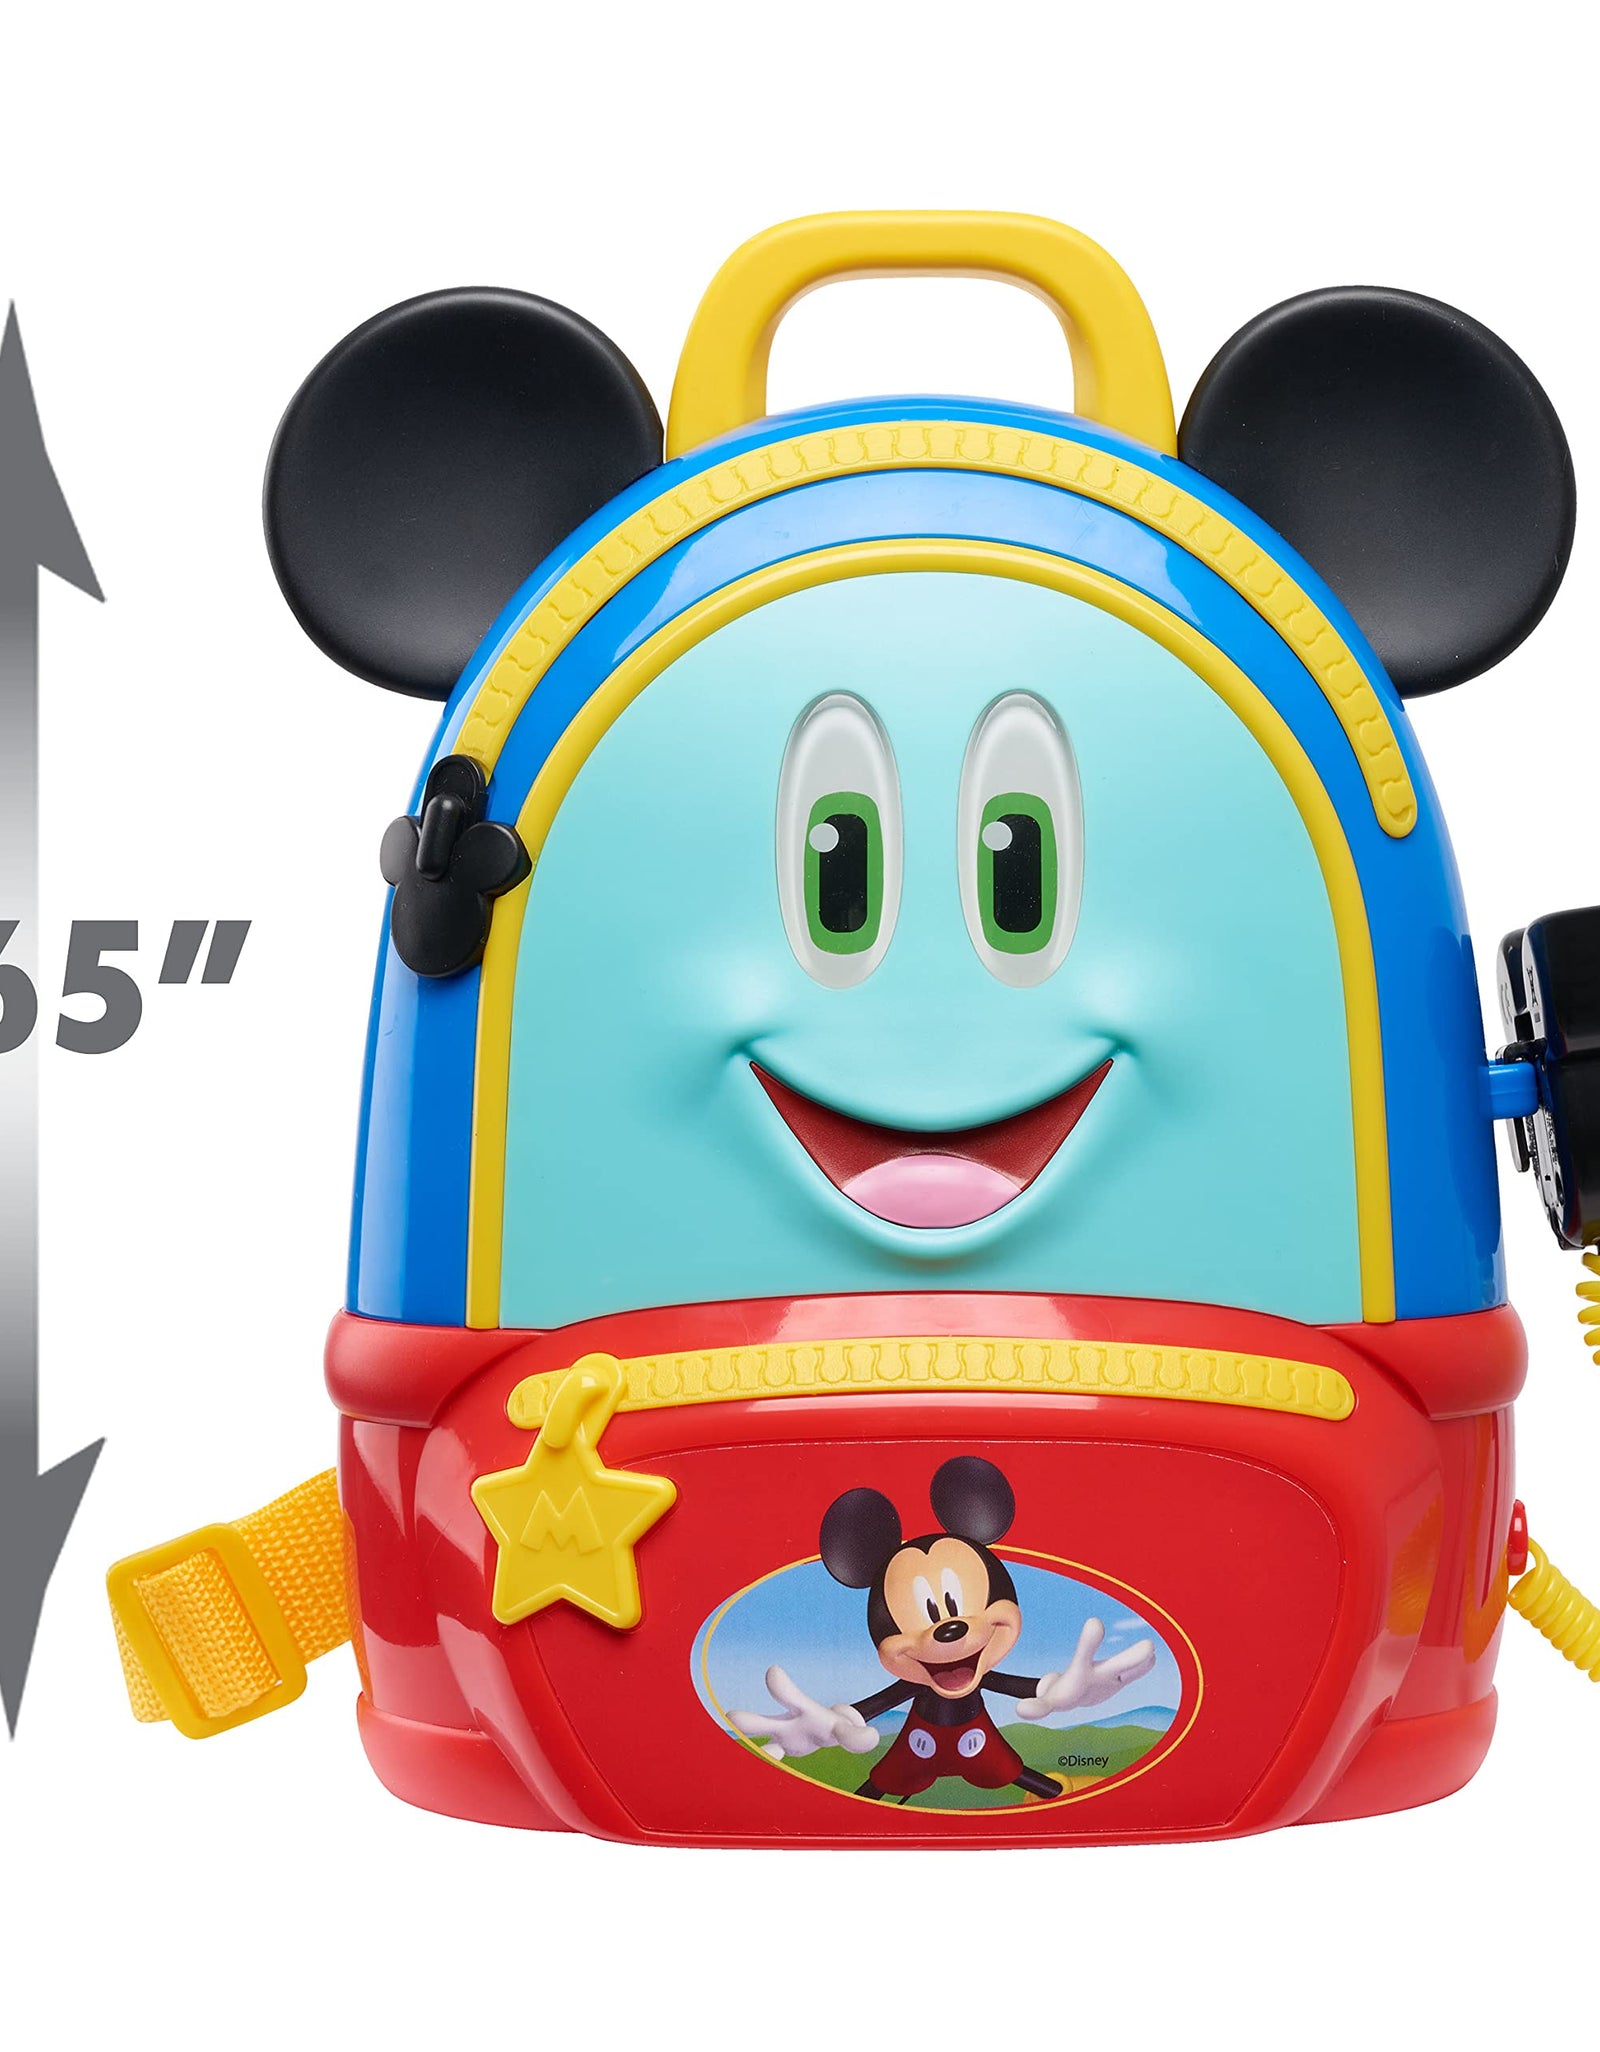 Disney Junior Mickey Mouse Funhouse Adventures Backpack, 5 Piece Pretend Play Set with Lights and Sounds Accessories, by Just Play